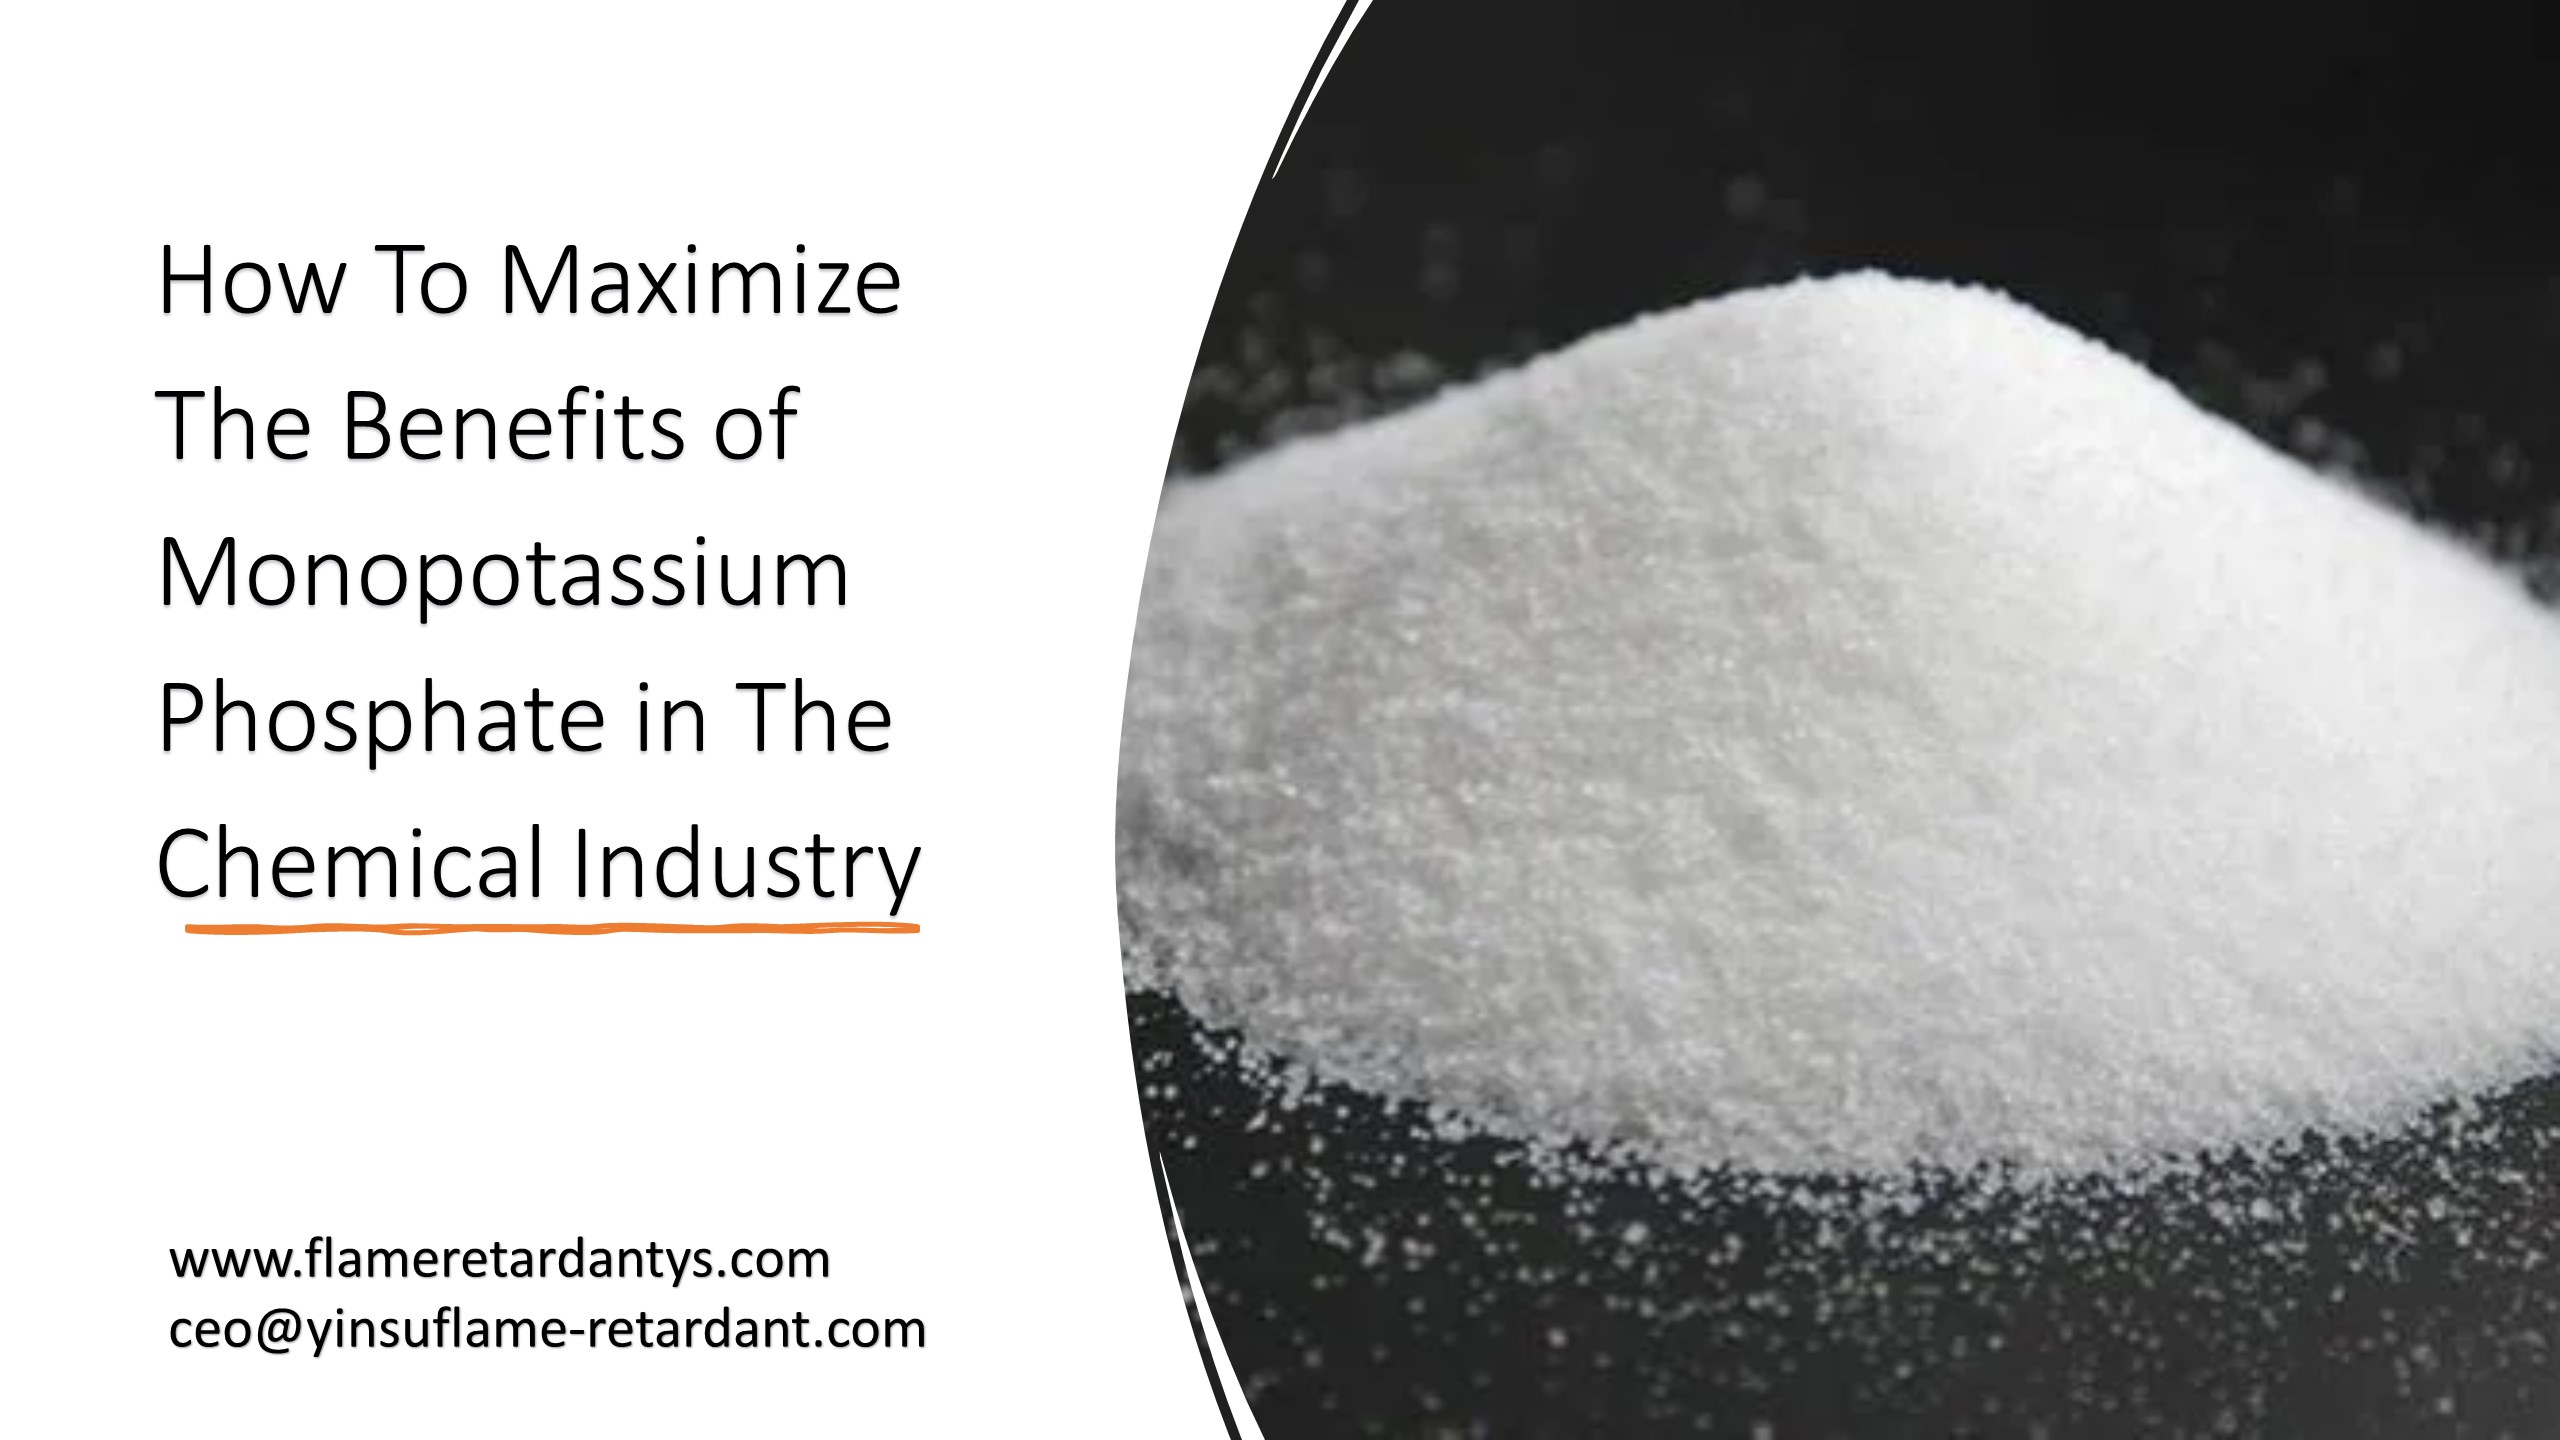 How To Maximize The Benefits of Monopotassium Phosphate in The Chemical Industry